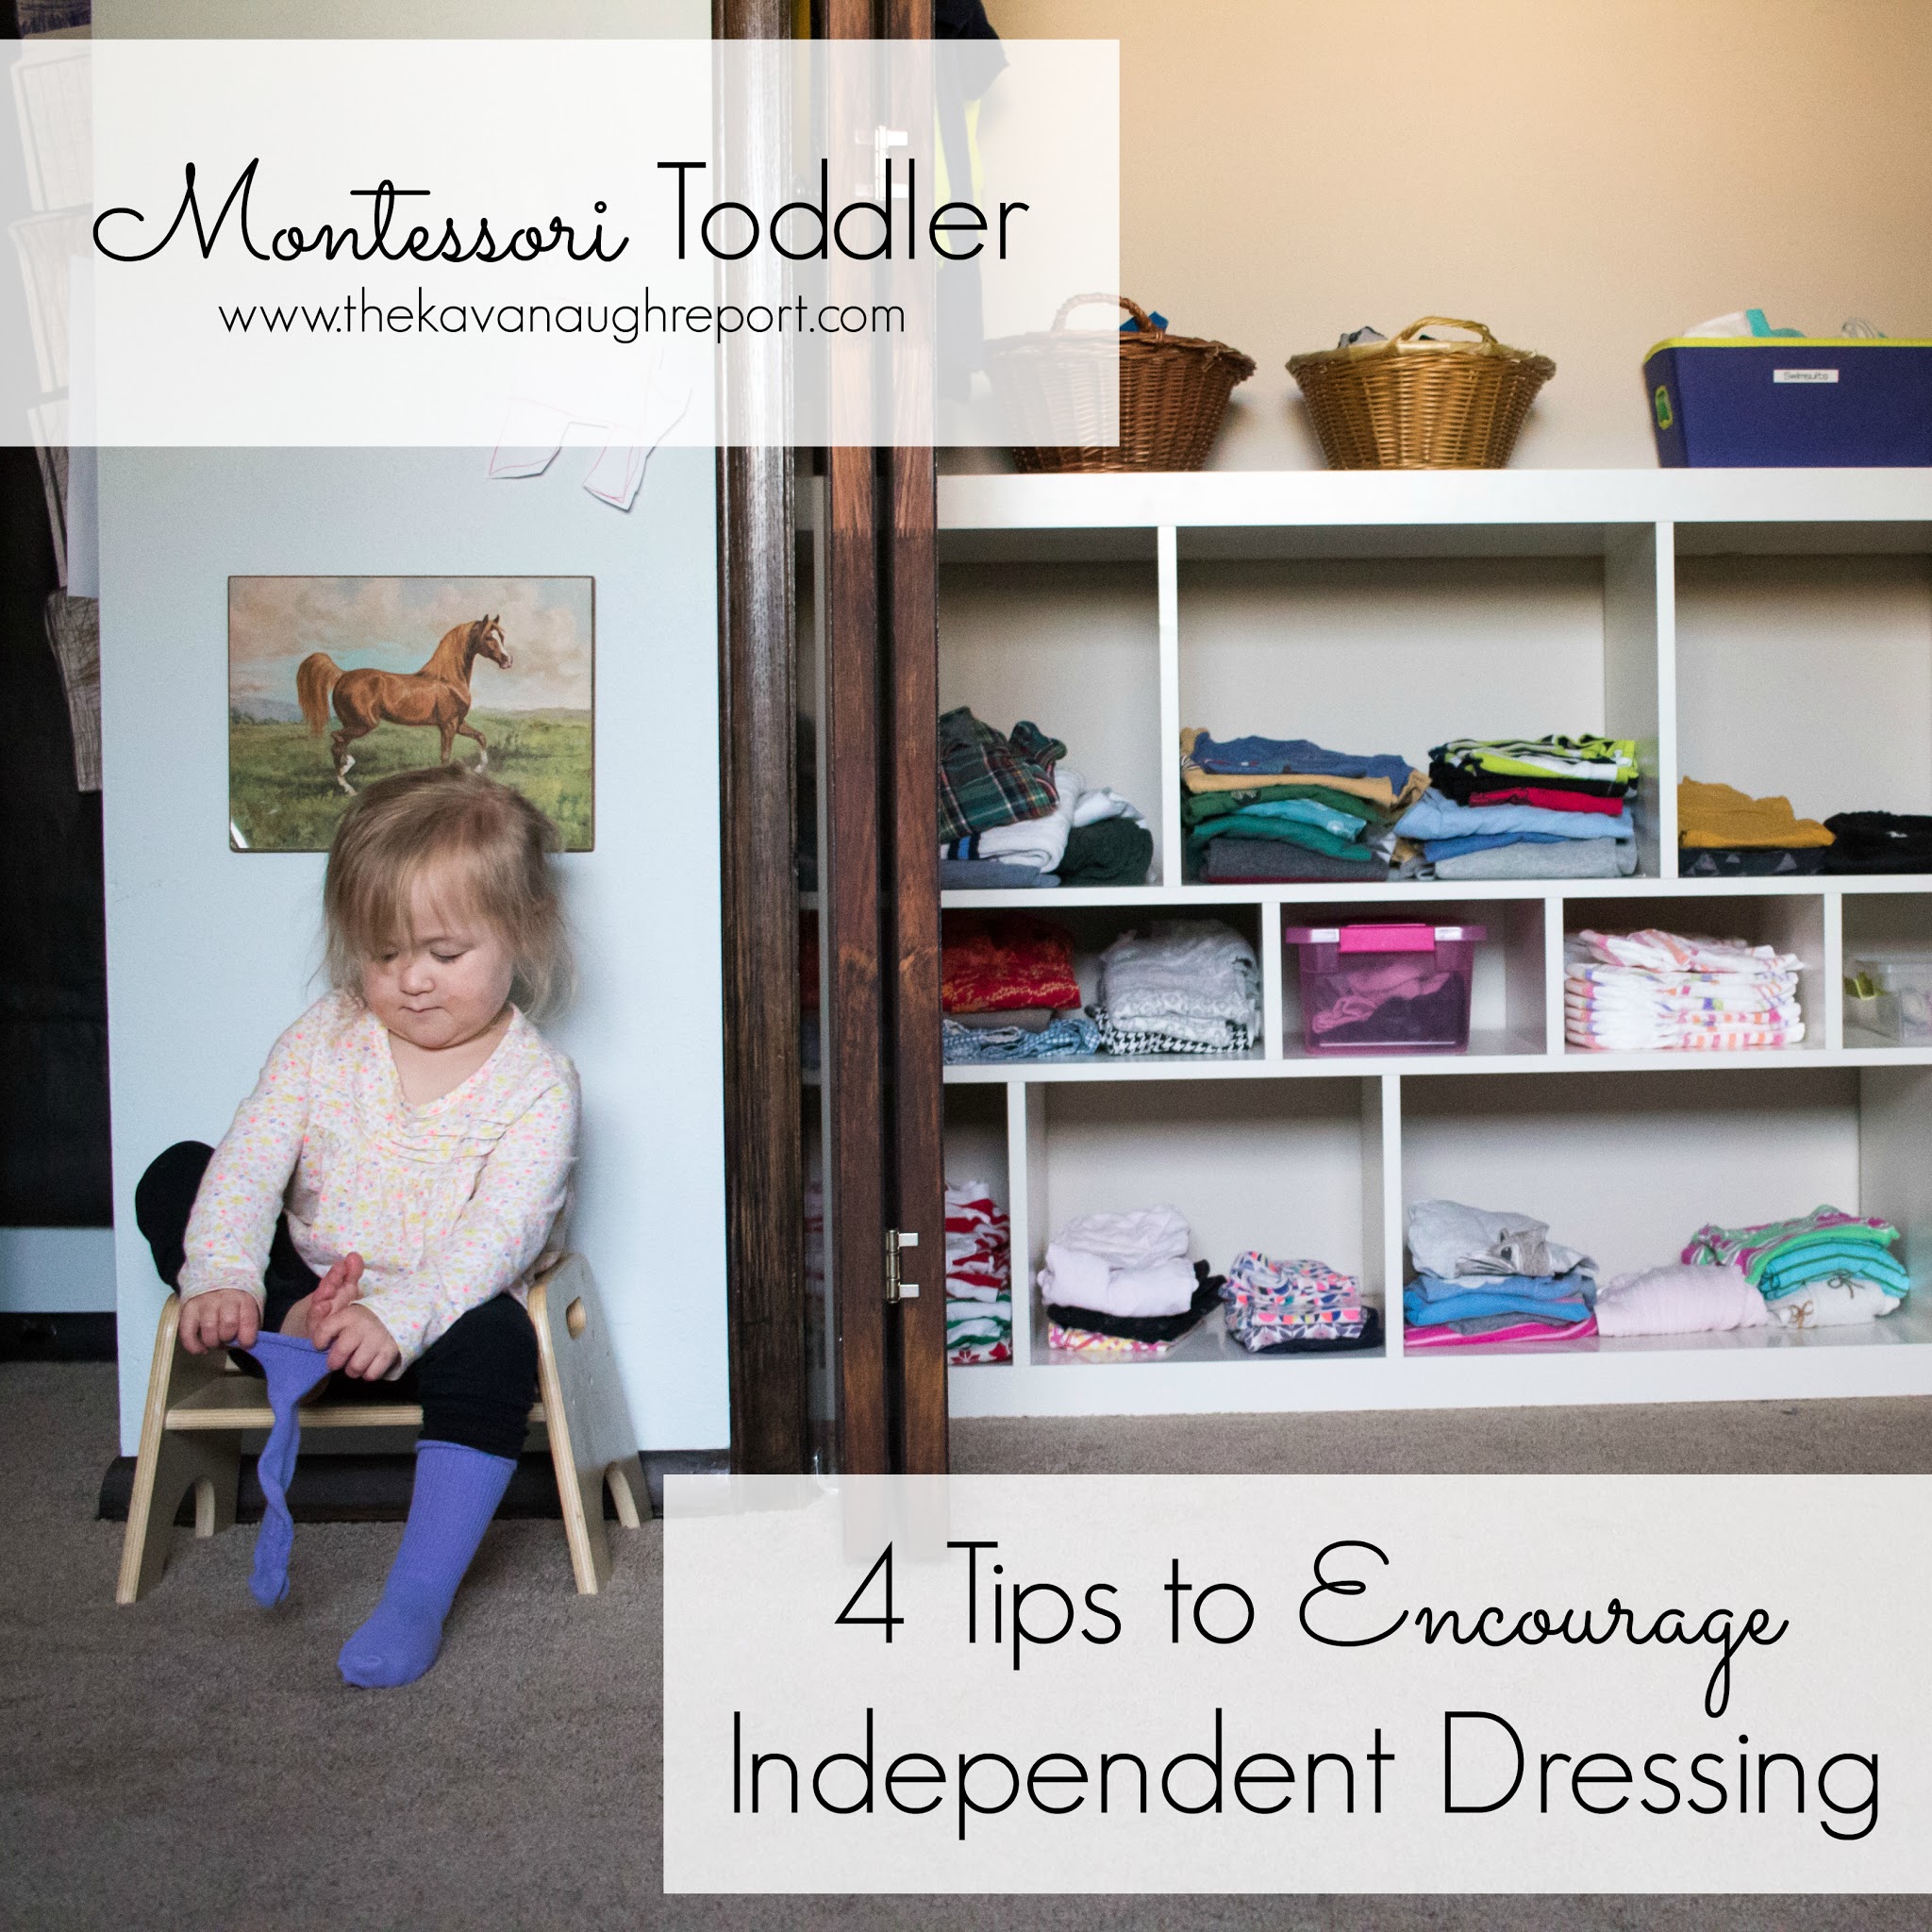 It can be difficult to get toddlers to dress themselves. Here are four Montessori tips to encourage independent dressing. These easy ideas can take away the struggles around dressing.